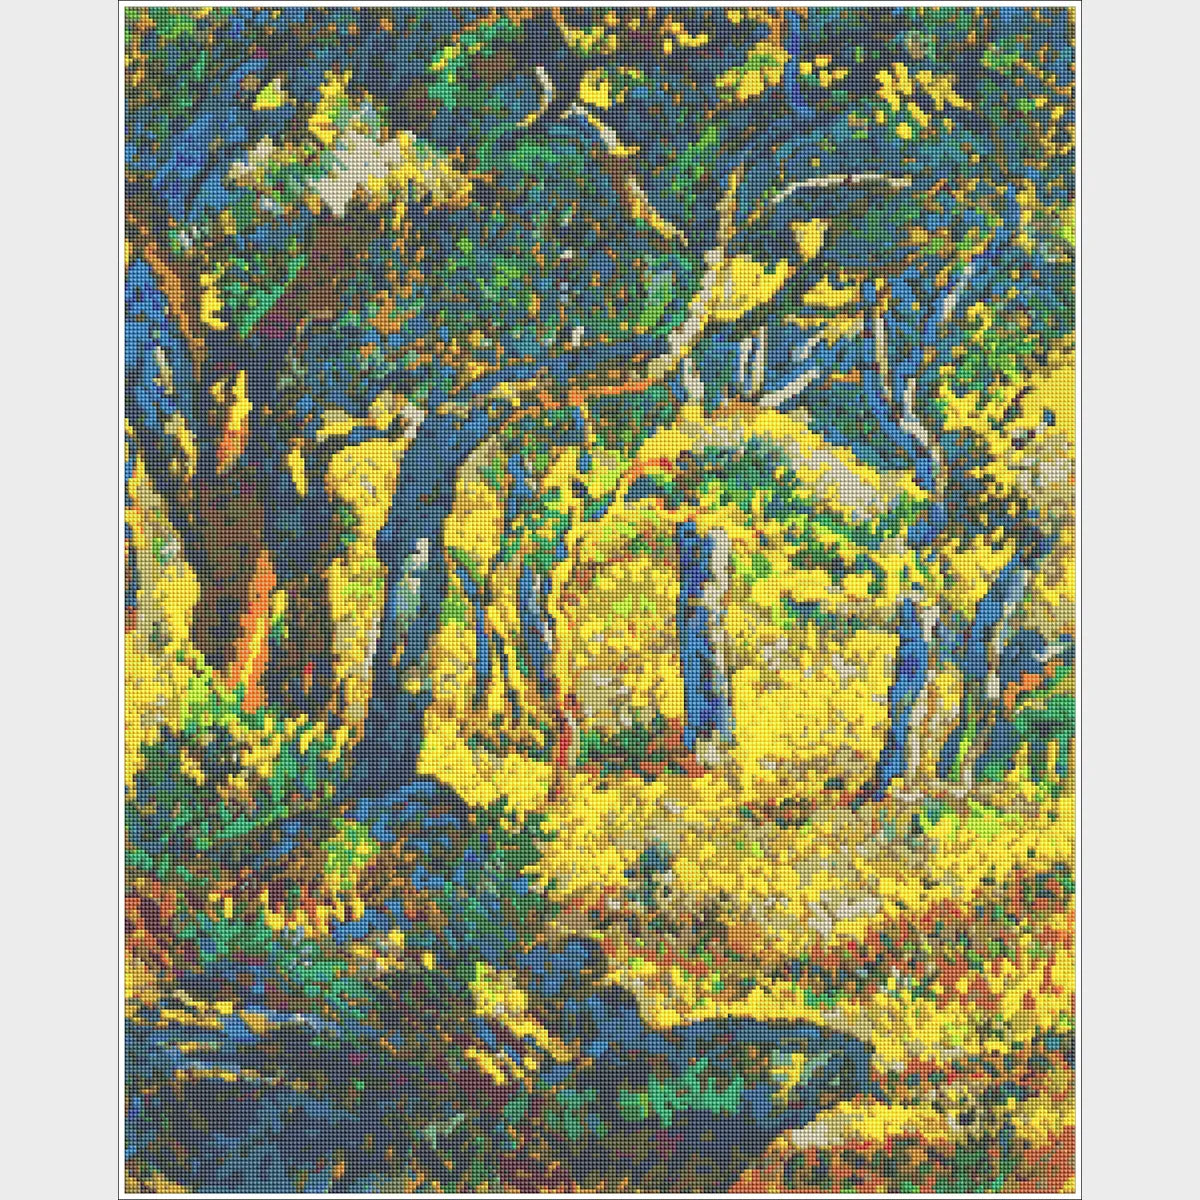 A Glade in Provence - Diamond Painting Kit-Unleash your creativity with our diamond painting kit featuring Henri Edmond Cross's stunning landscape. Enjoy a relaxing, detail-rich art project today!-Canvas by Numbers